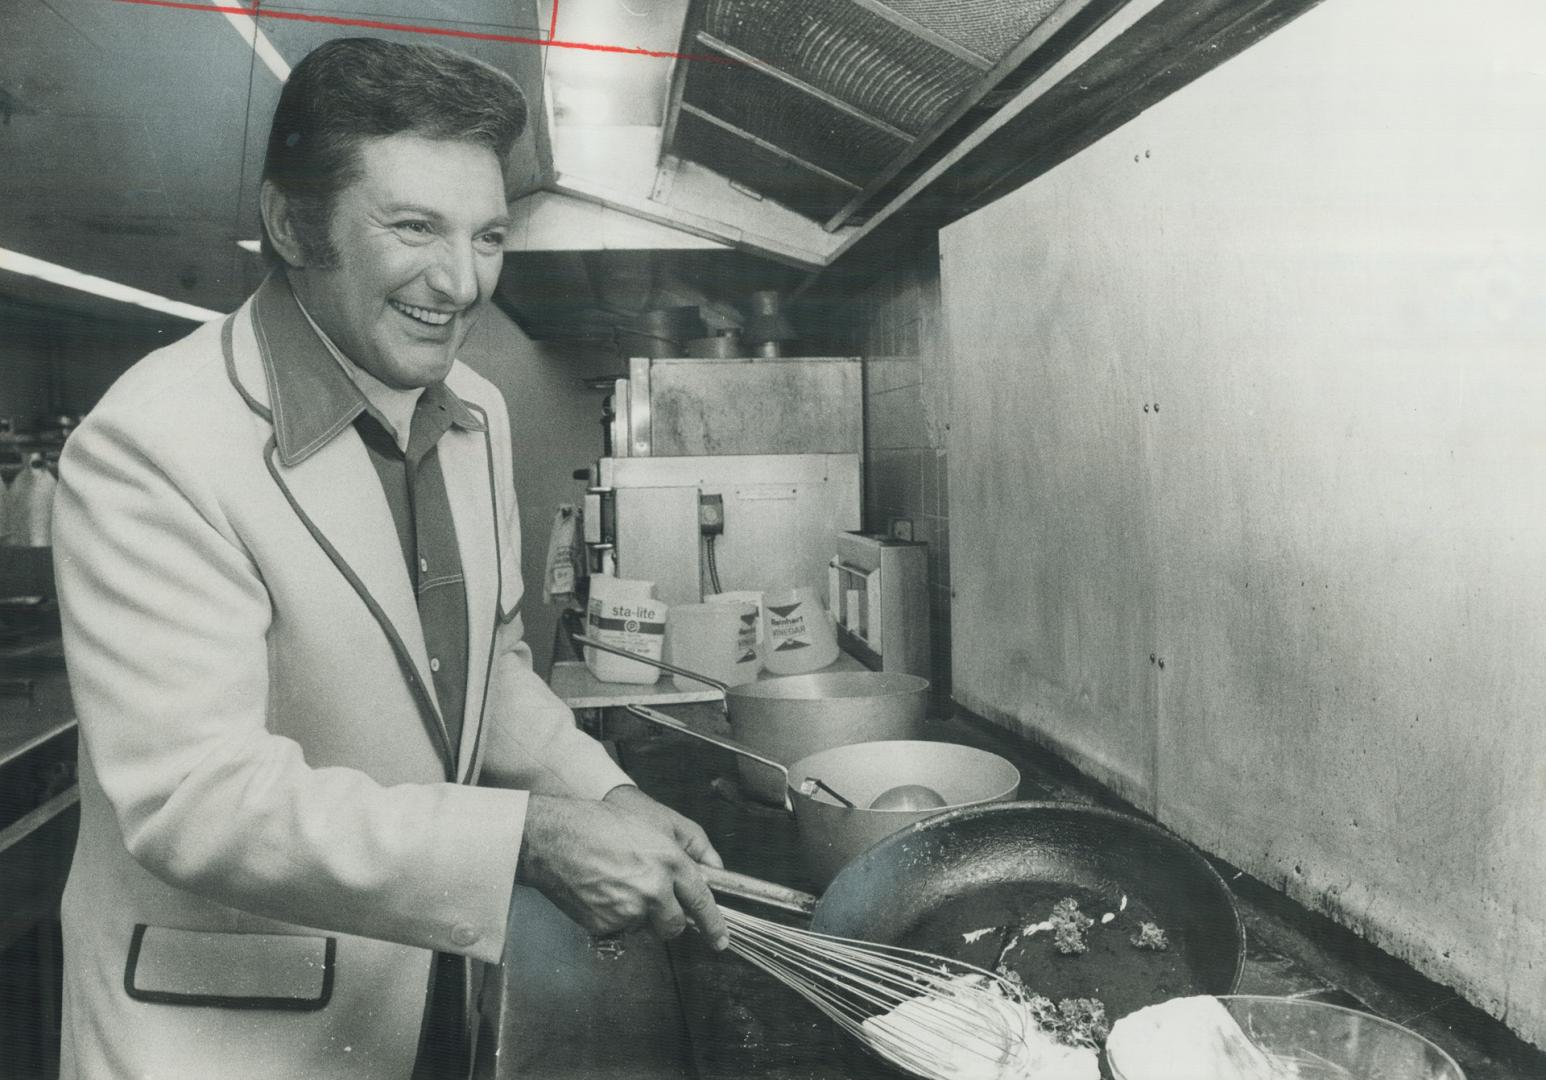 Liberace Demonstrates his cooking skill in the kitchen of O'Keefe Centre, where he has been performing this week